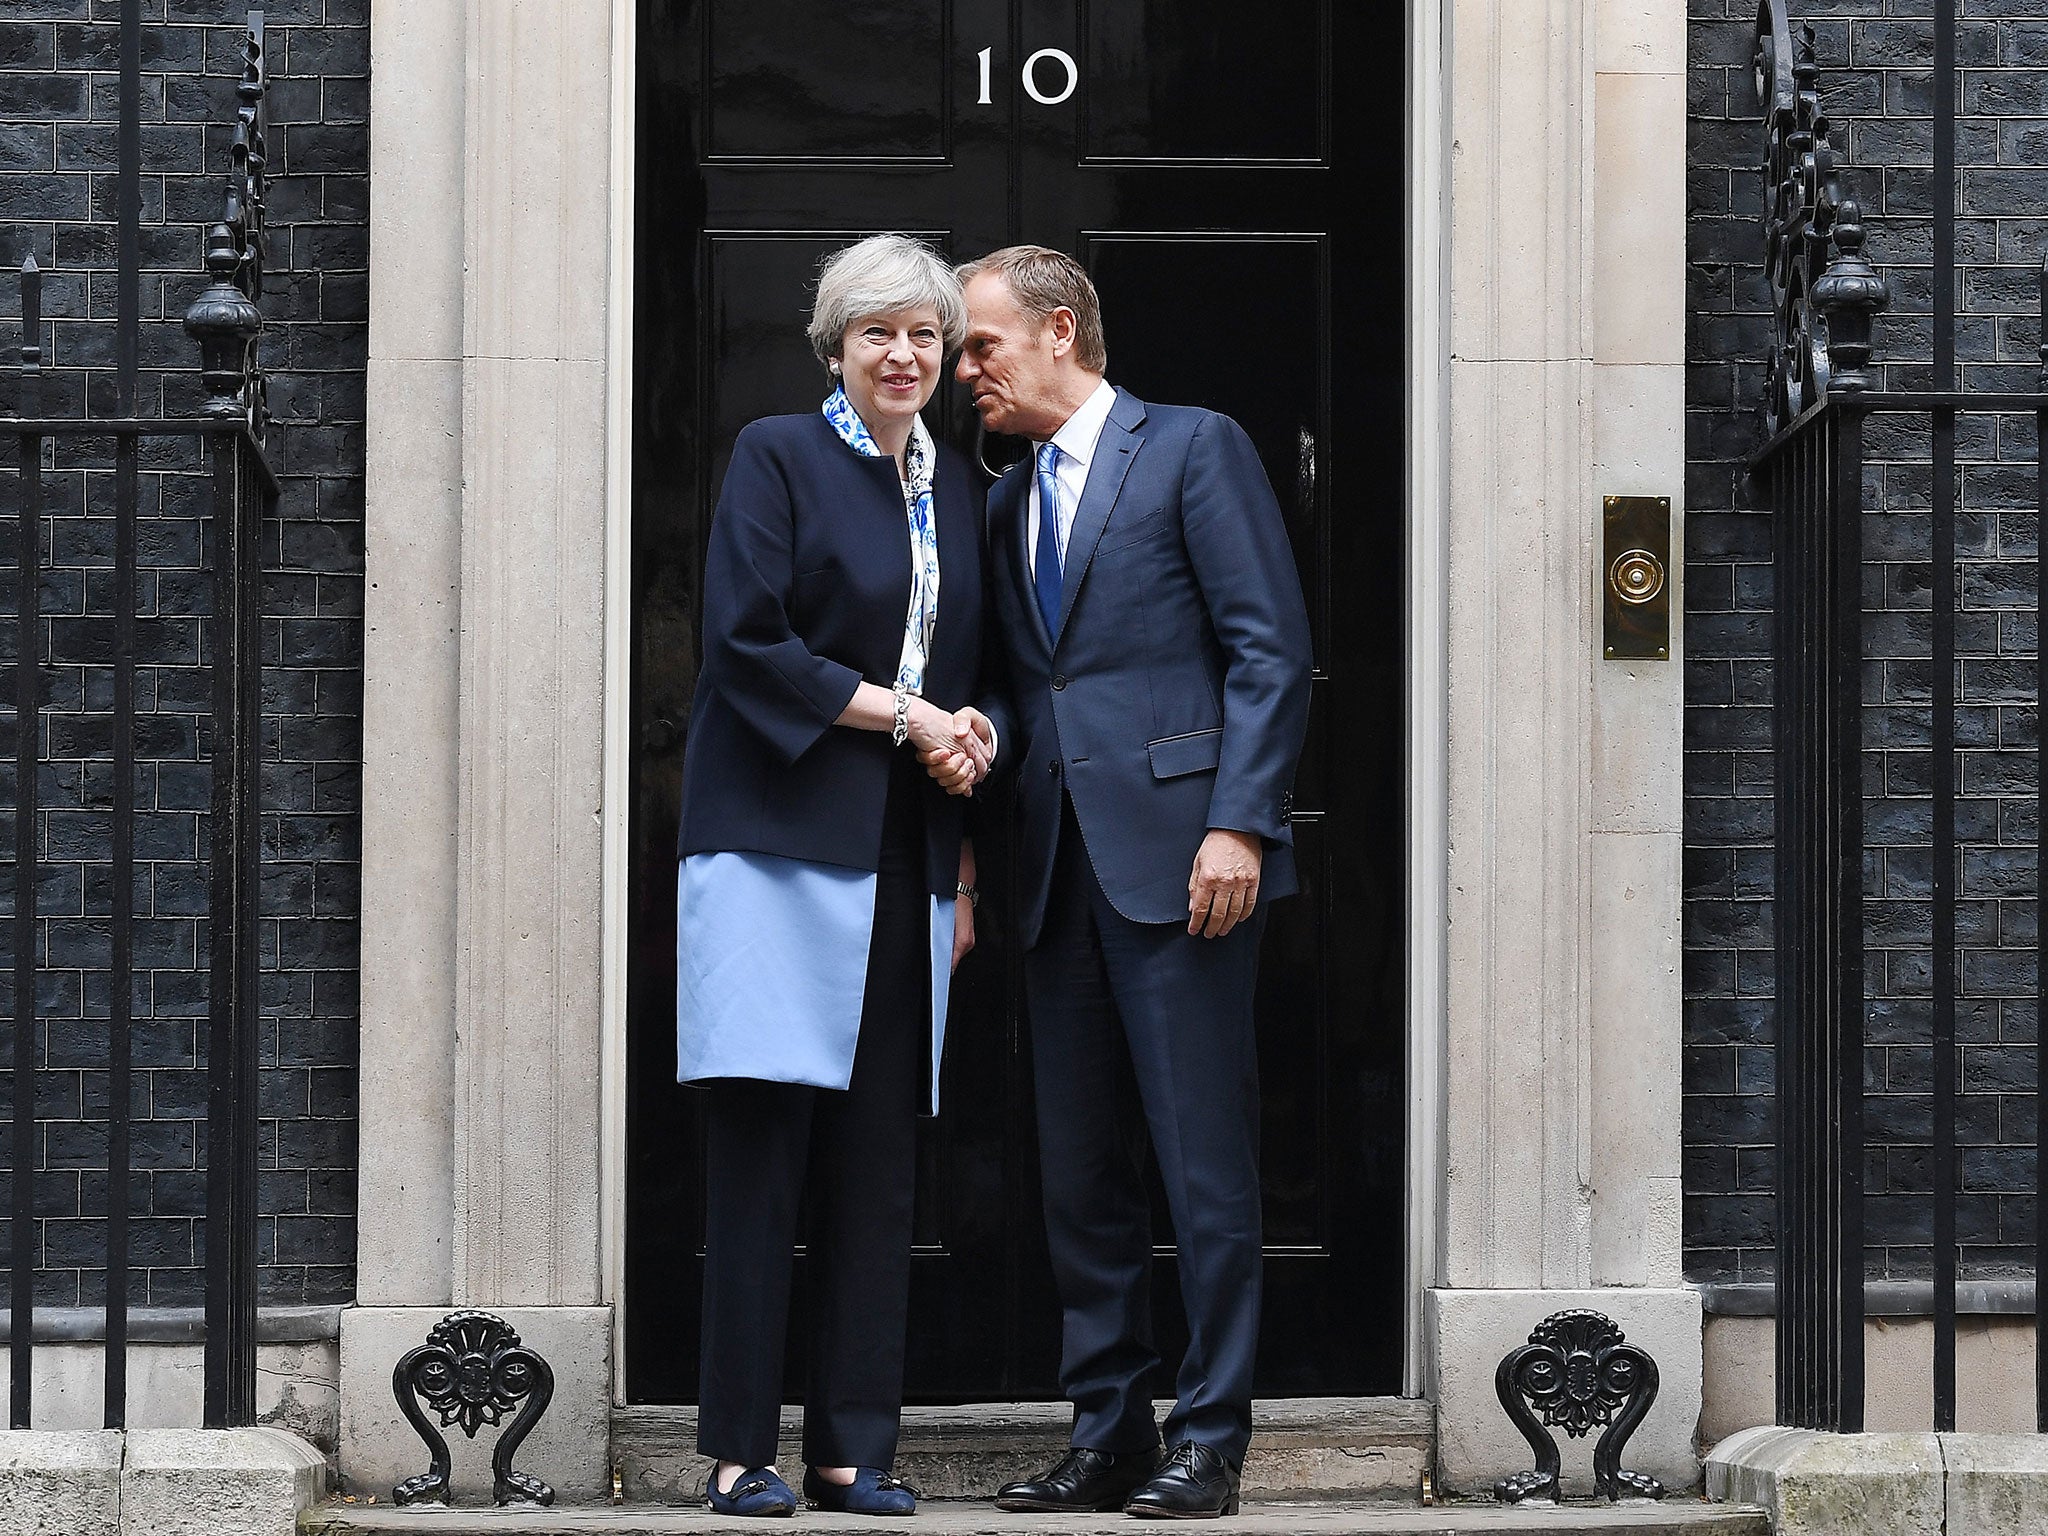 The PM’s dealings with European Council President Donald Tusk have left Tory MPs in a relaxed frame of mind